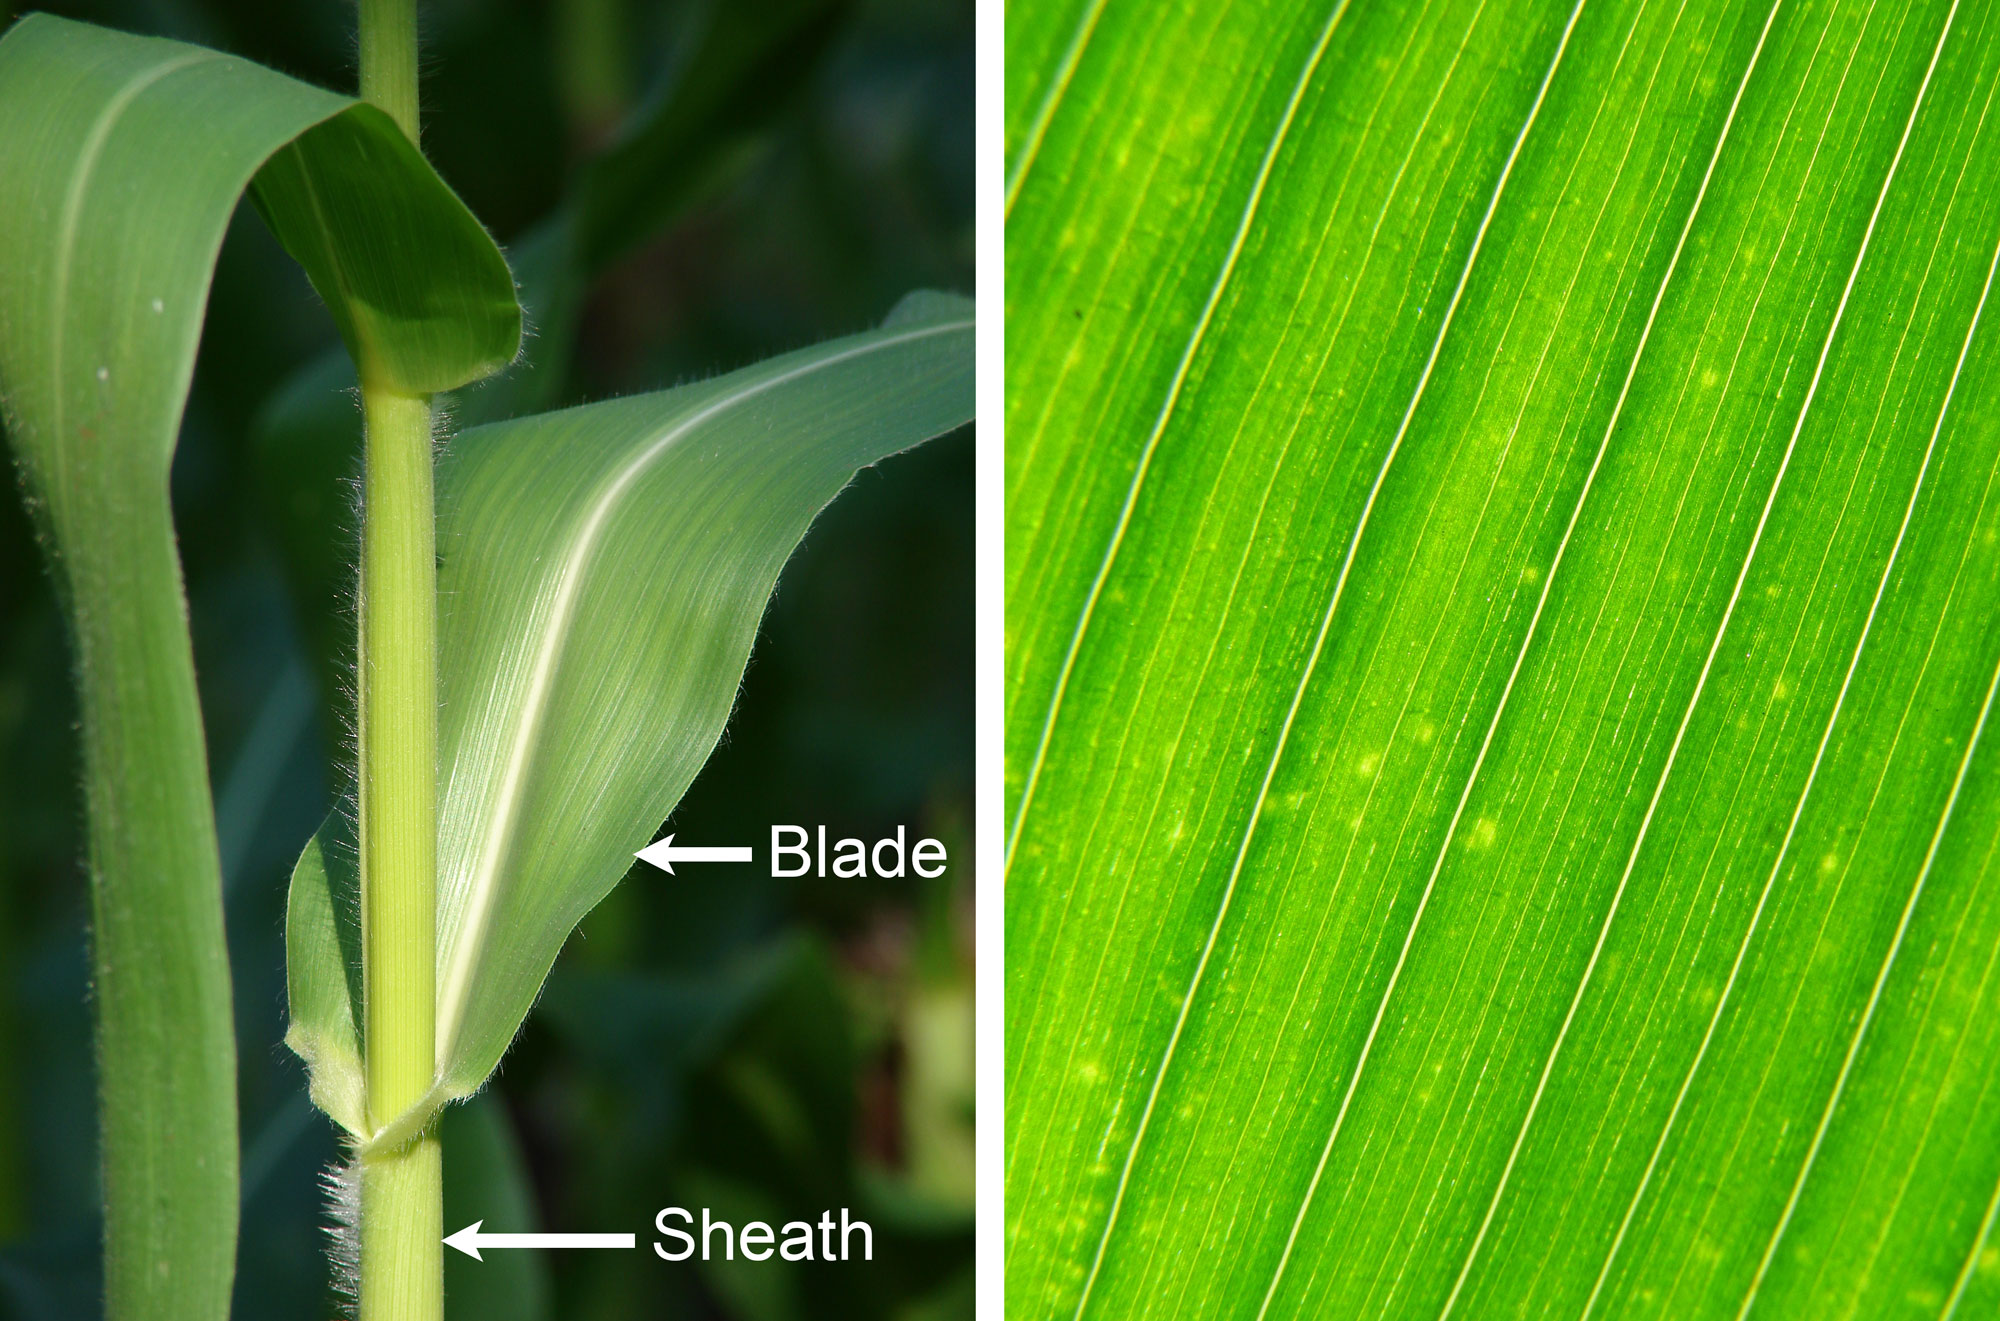 2-panel figure showing photographs of foliage leaves of maize. Panel 1: Portion of a maize stalk and portions of two foliage leaves, with the blade and sheath of one leaf labeled. Panel 2: Detail of the blade of a maize leaf showing the parallel major veins.